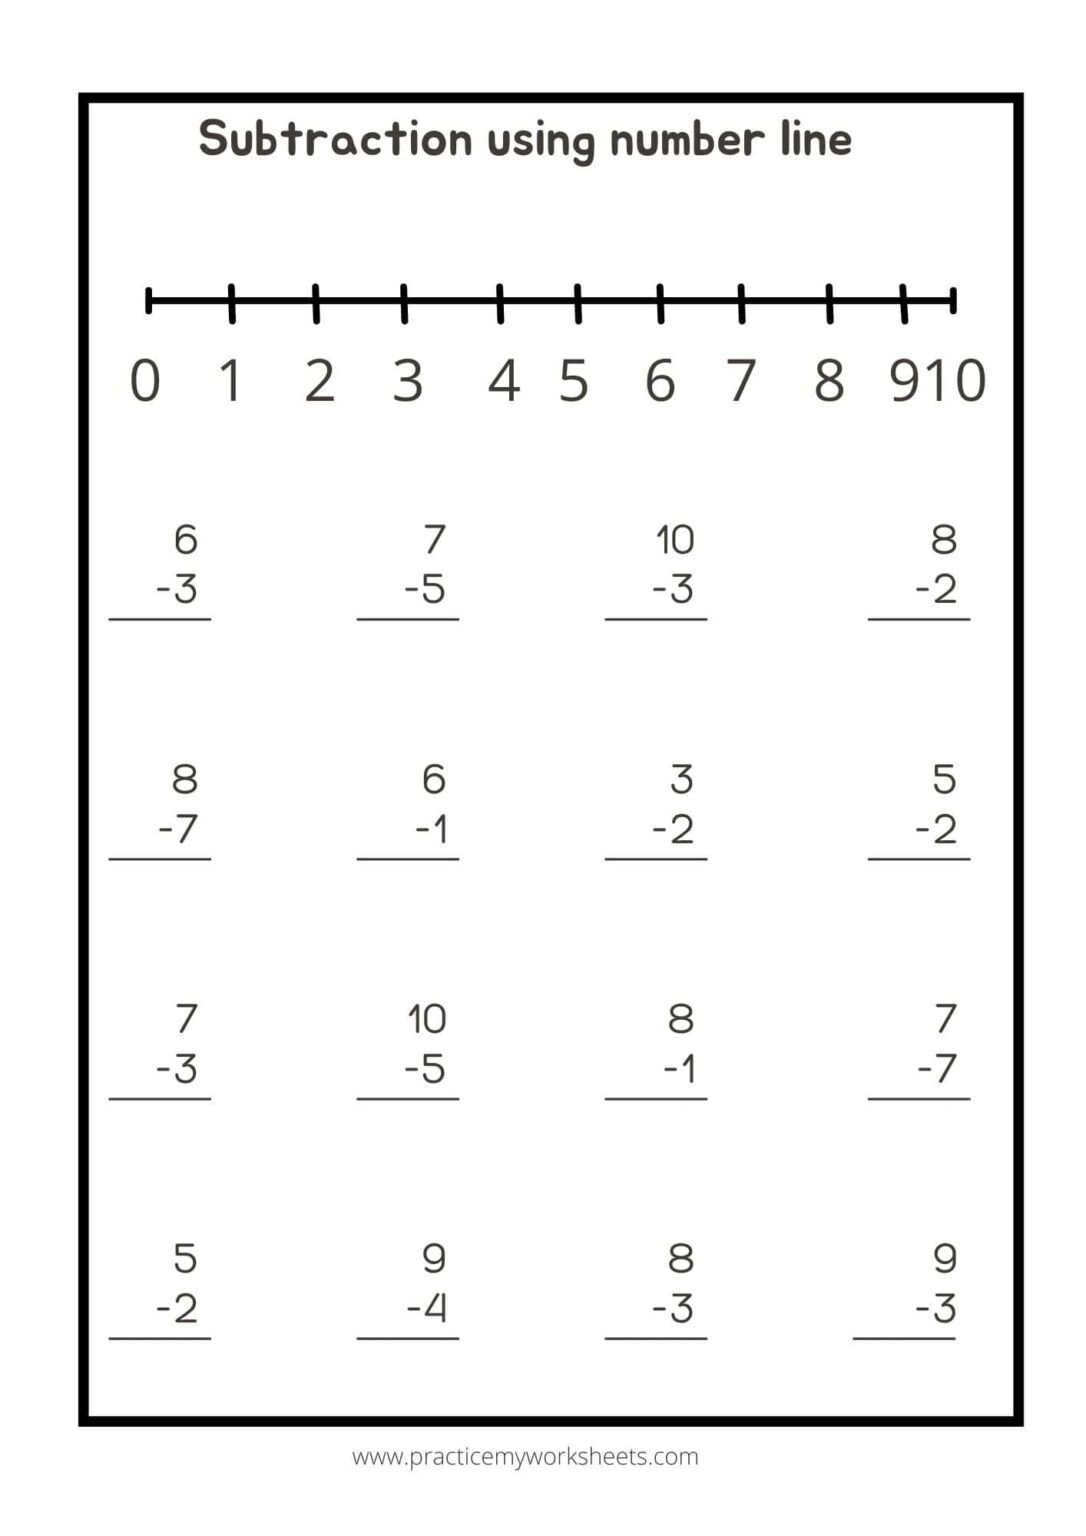 subtract-on-number-line-2-estudynotes